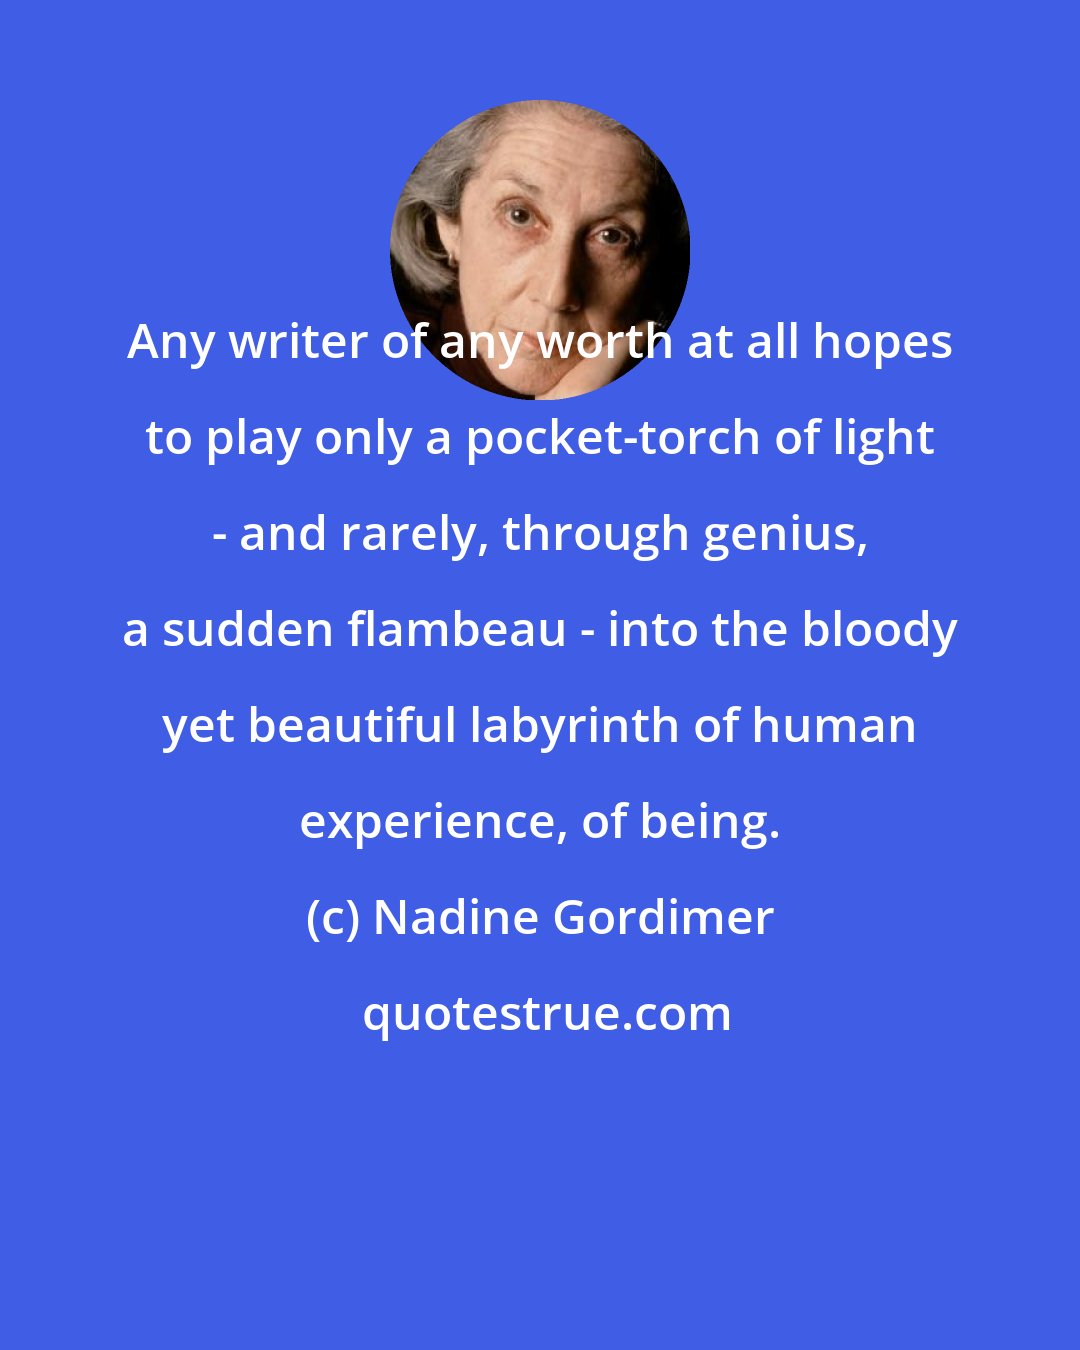 Nadine Gordimer: Any writer of any worth at all hopes to play only a pocket-torch of light - and rarely, through genius, a sudden flambeau - into the bloody yet beautiful labyrinth of human experience, of being.